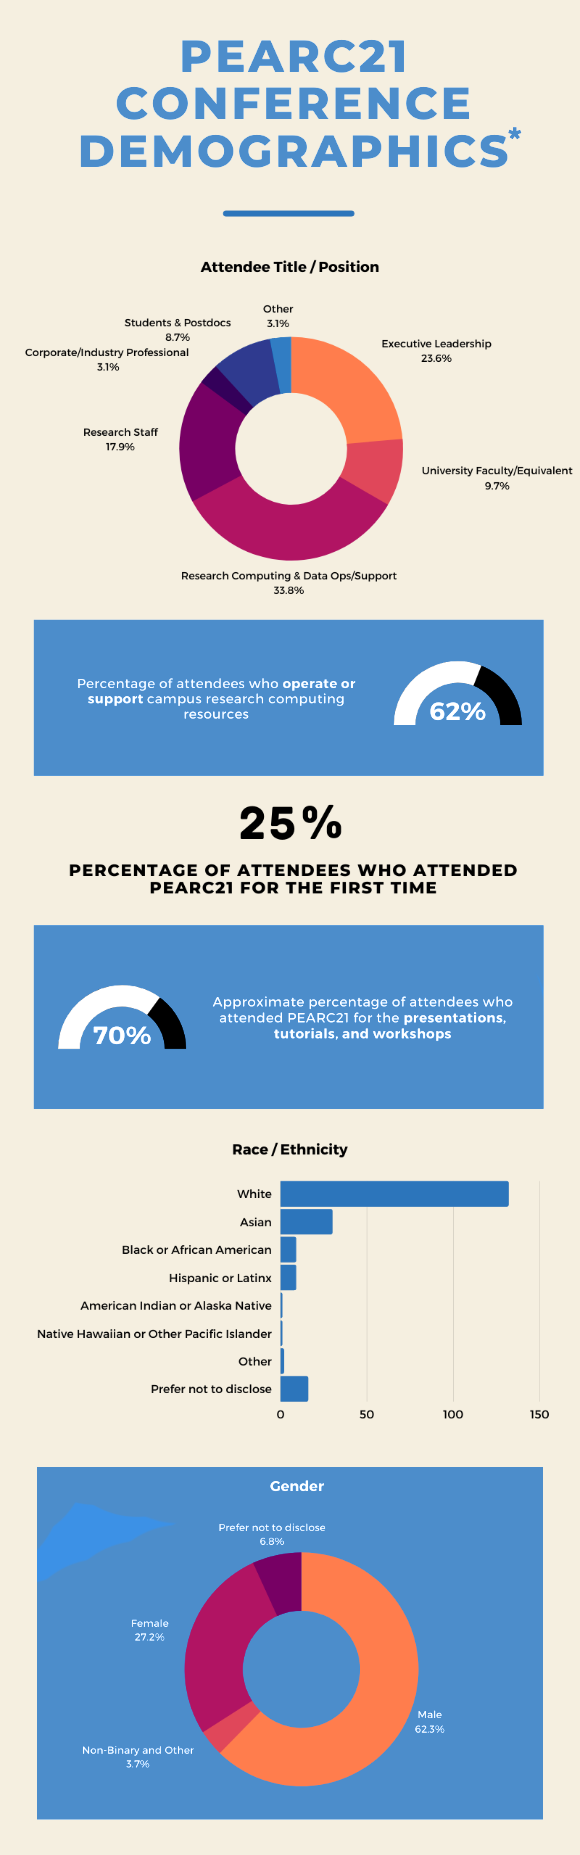 PEARC21 Conference Demographics infographic